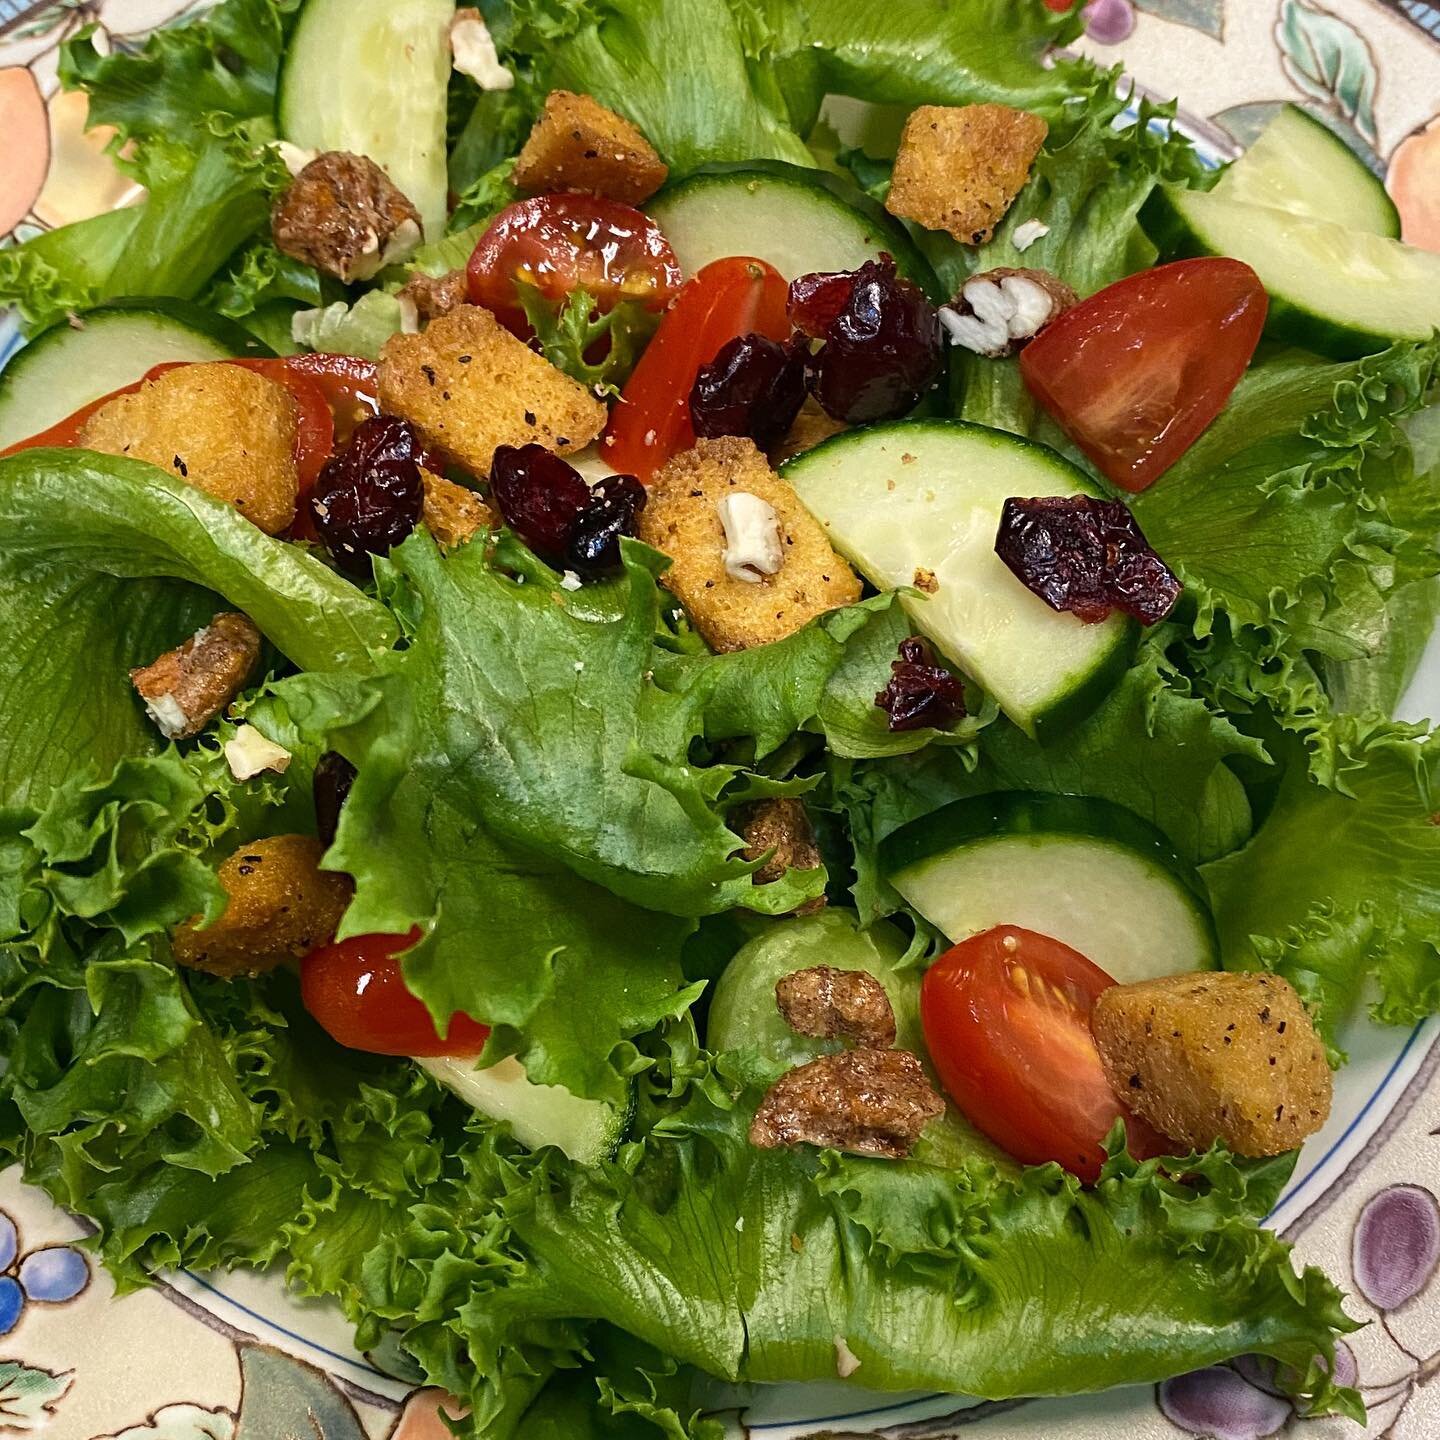 Creation from one of our #ohiolocals Alison who loves our leafy greens! She made this salad with cucumbers, tomatoes, cranberries, croutons, and spiced pecans! #handsfreecultivation #ohiofarm #ohioproduce #healthyeating